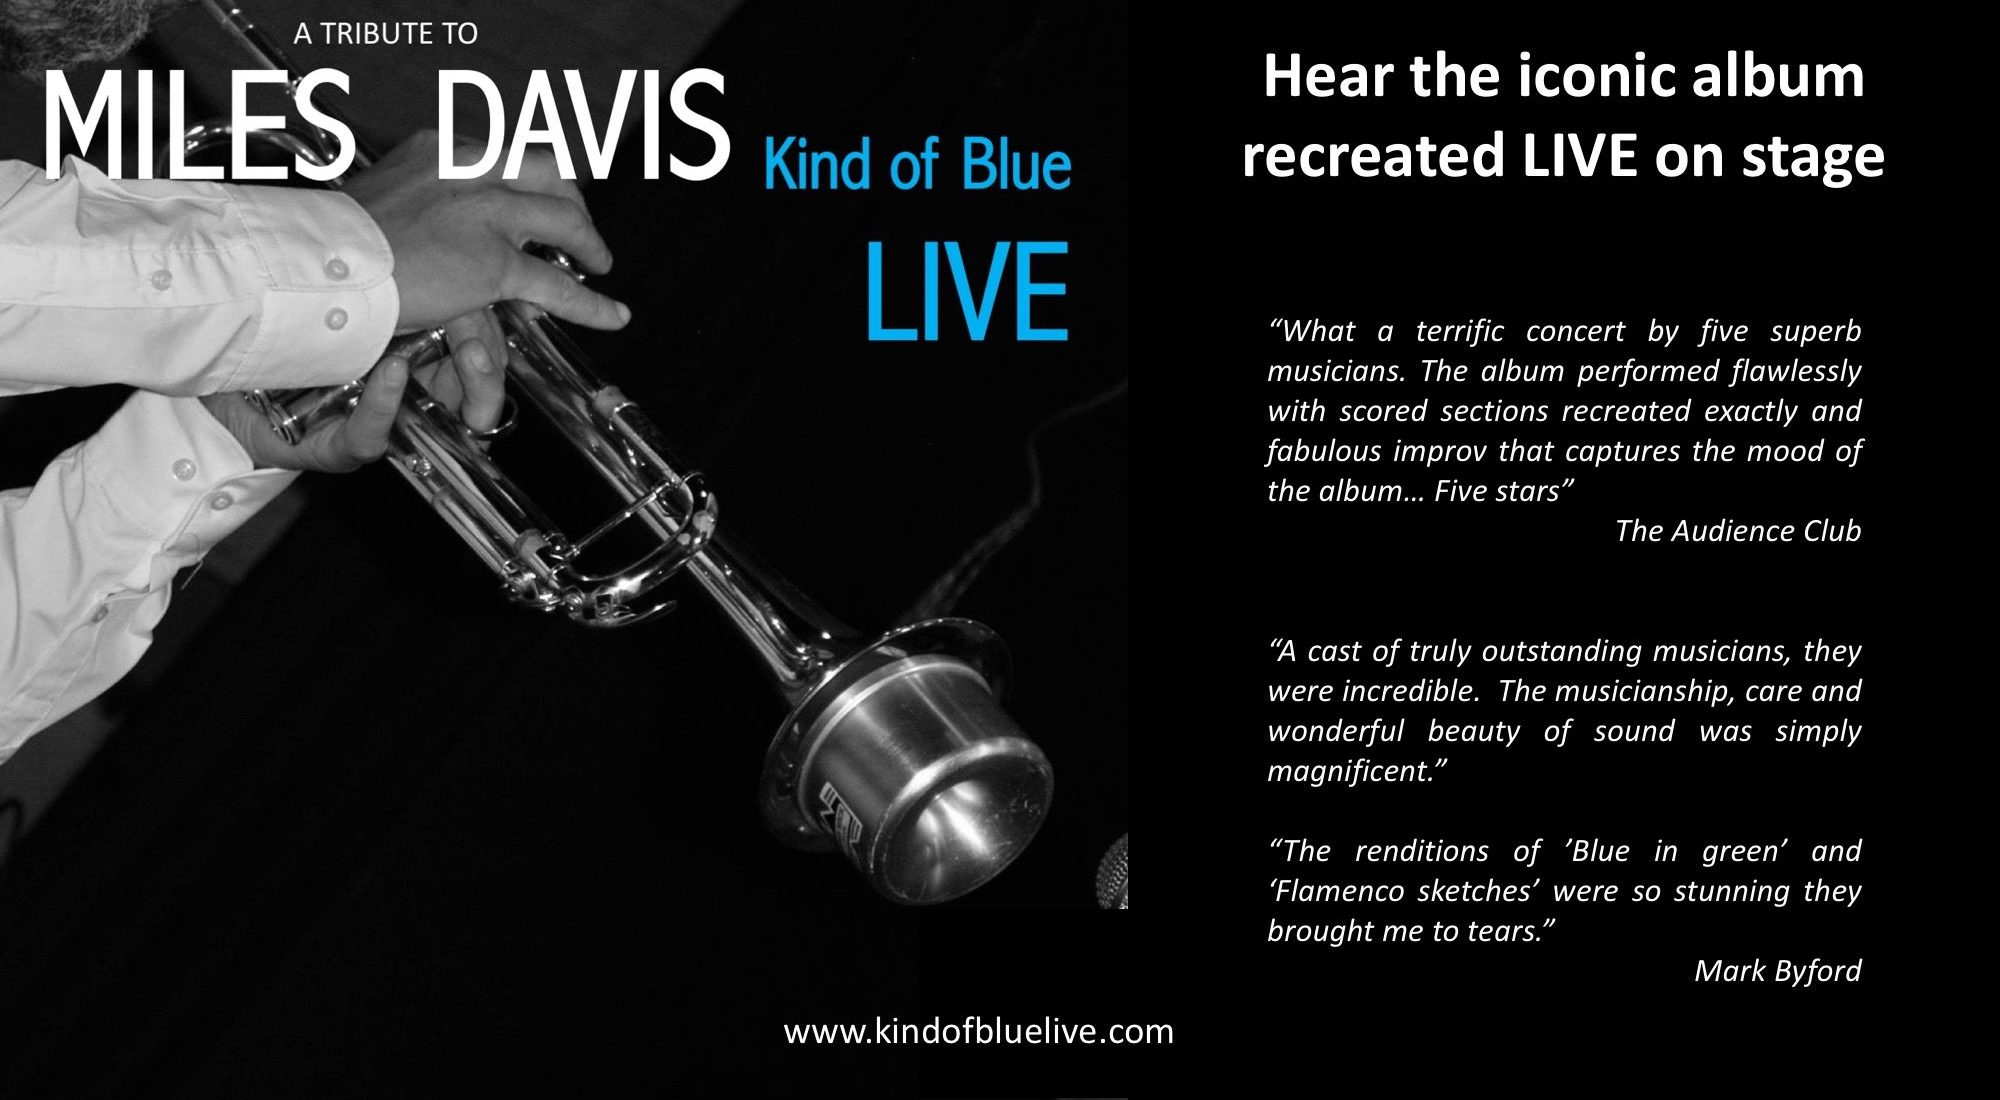 Kind of Blue – A Tribute To Miles Davis